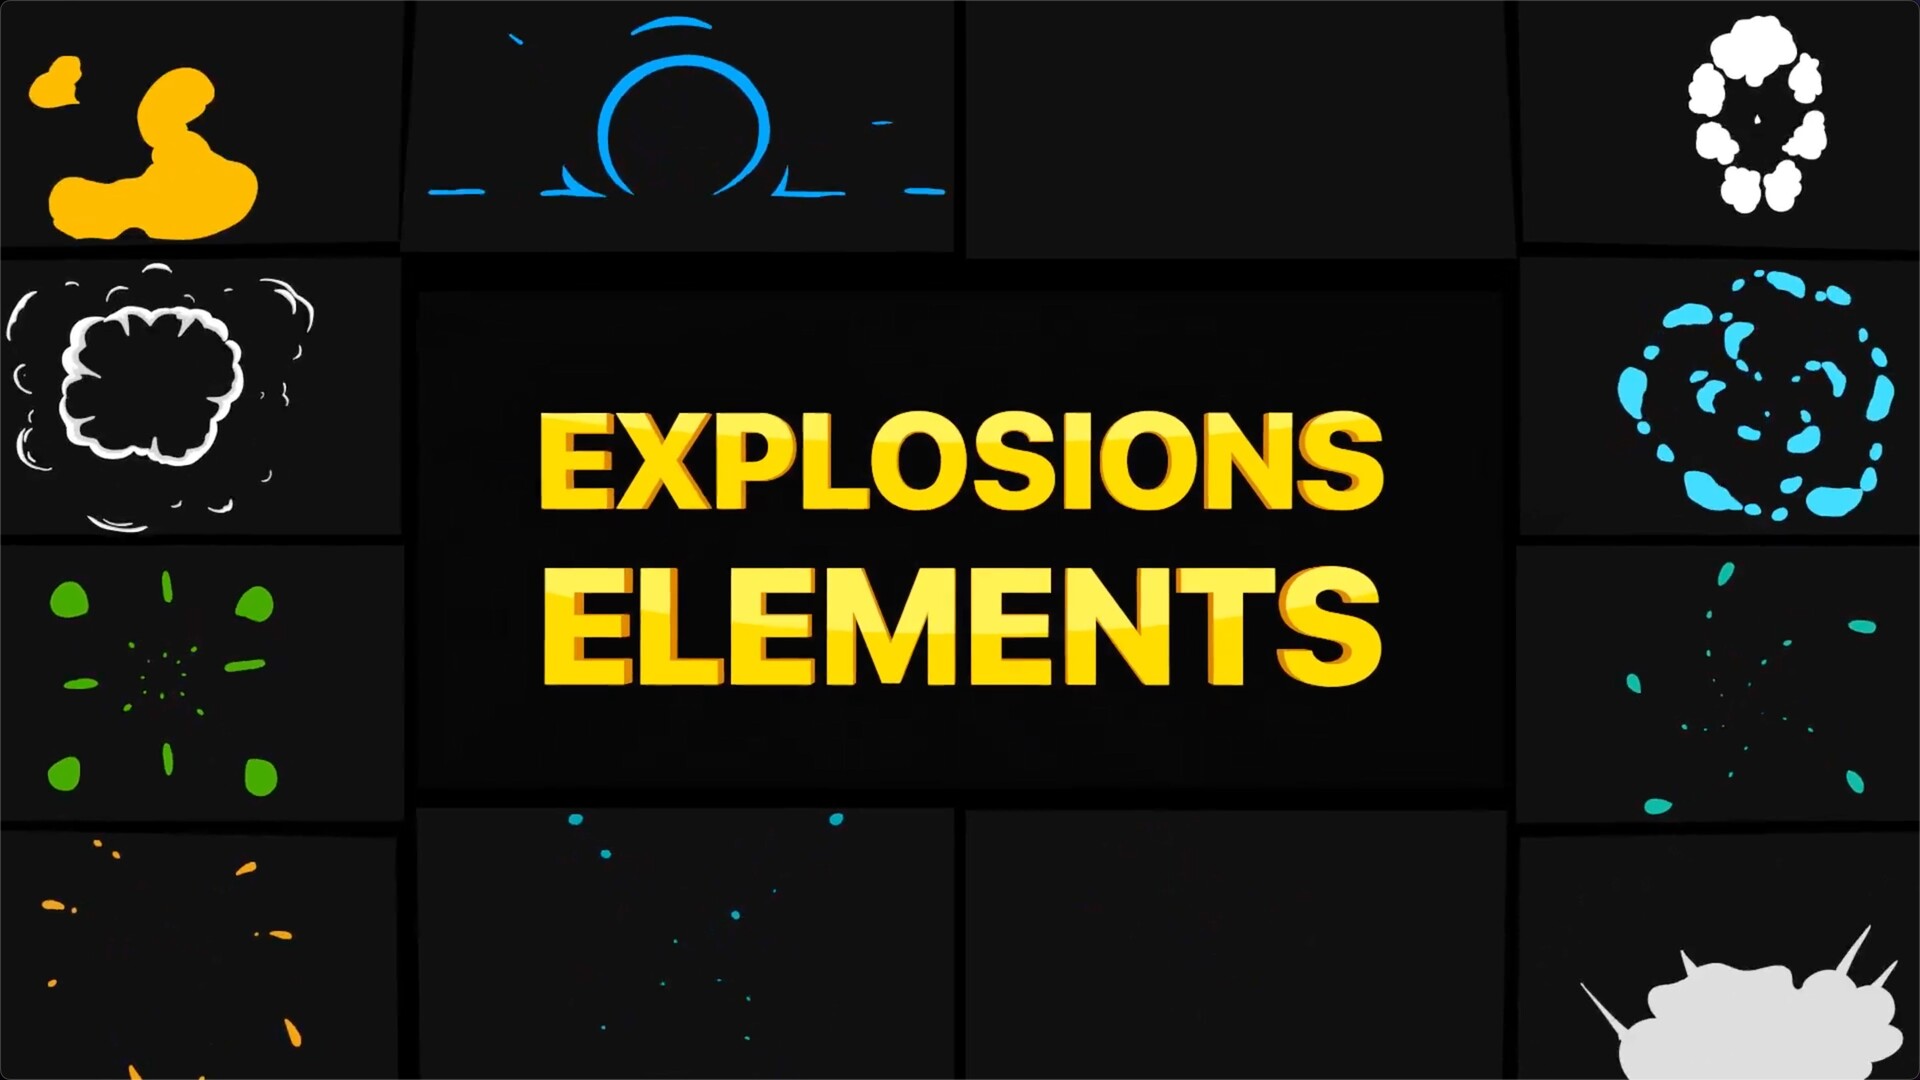 fcpx插件：Explosions Elements for Mac(卡通爆炸动画元素)